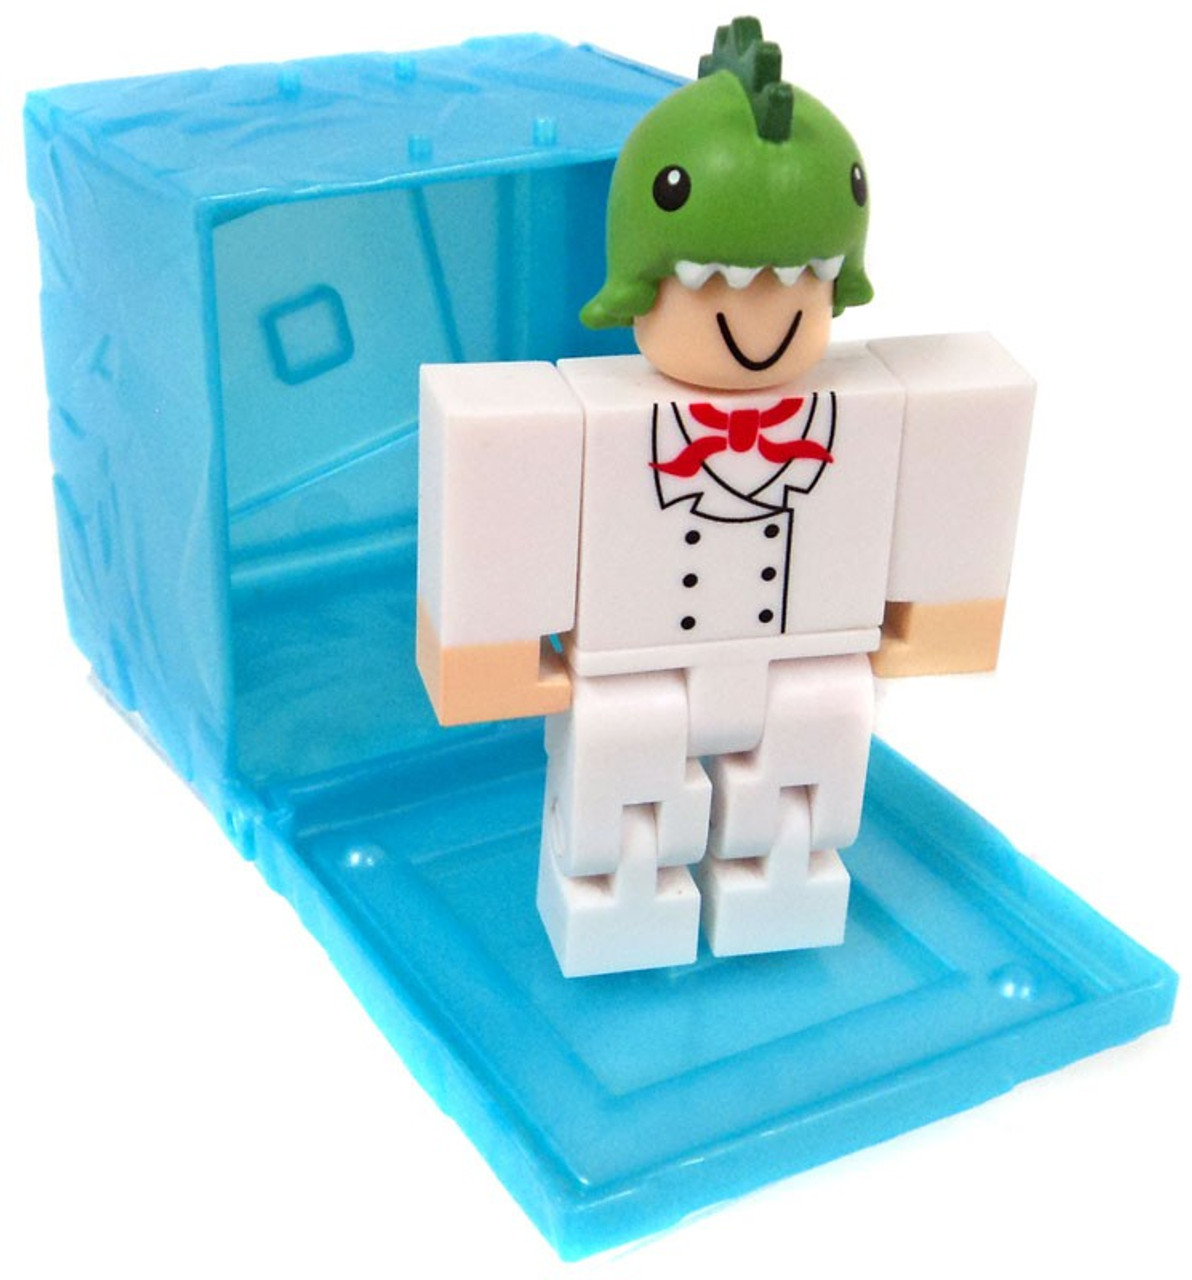 Roblox Red Series 3 Theme Park Tycoon Dino Vender 3 Mini Figure Blue Cube With Online Code Loose Jazwares Toywiz - overwatch tycoon codes roblox